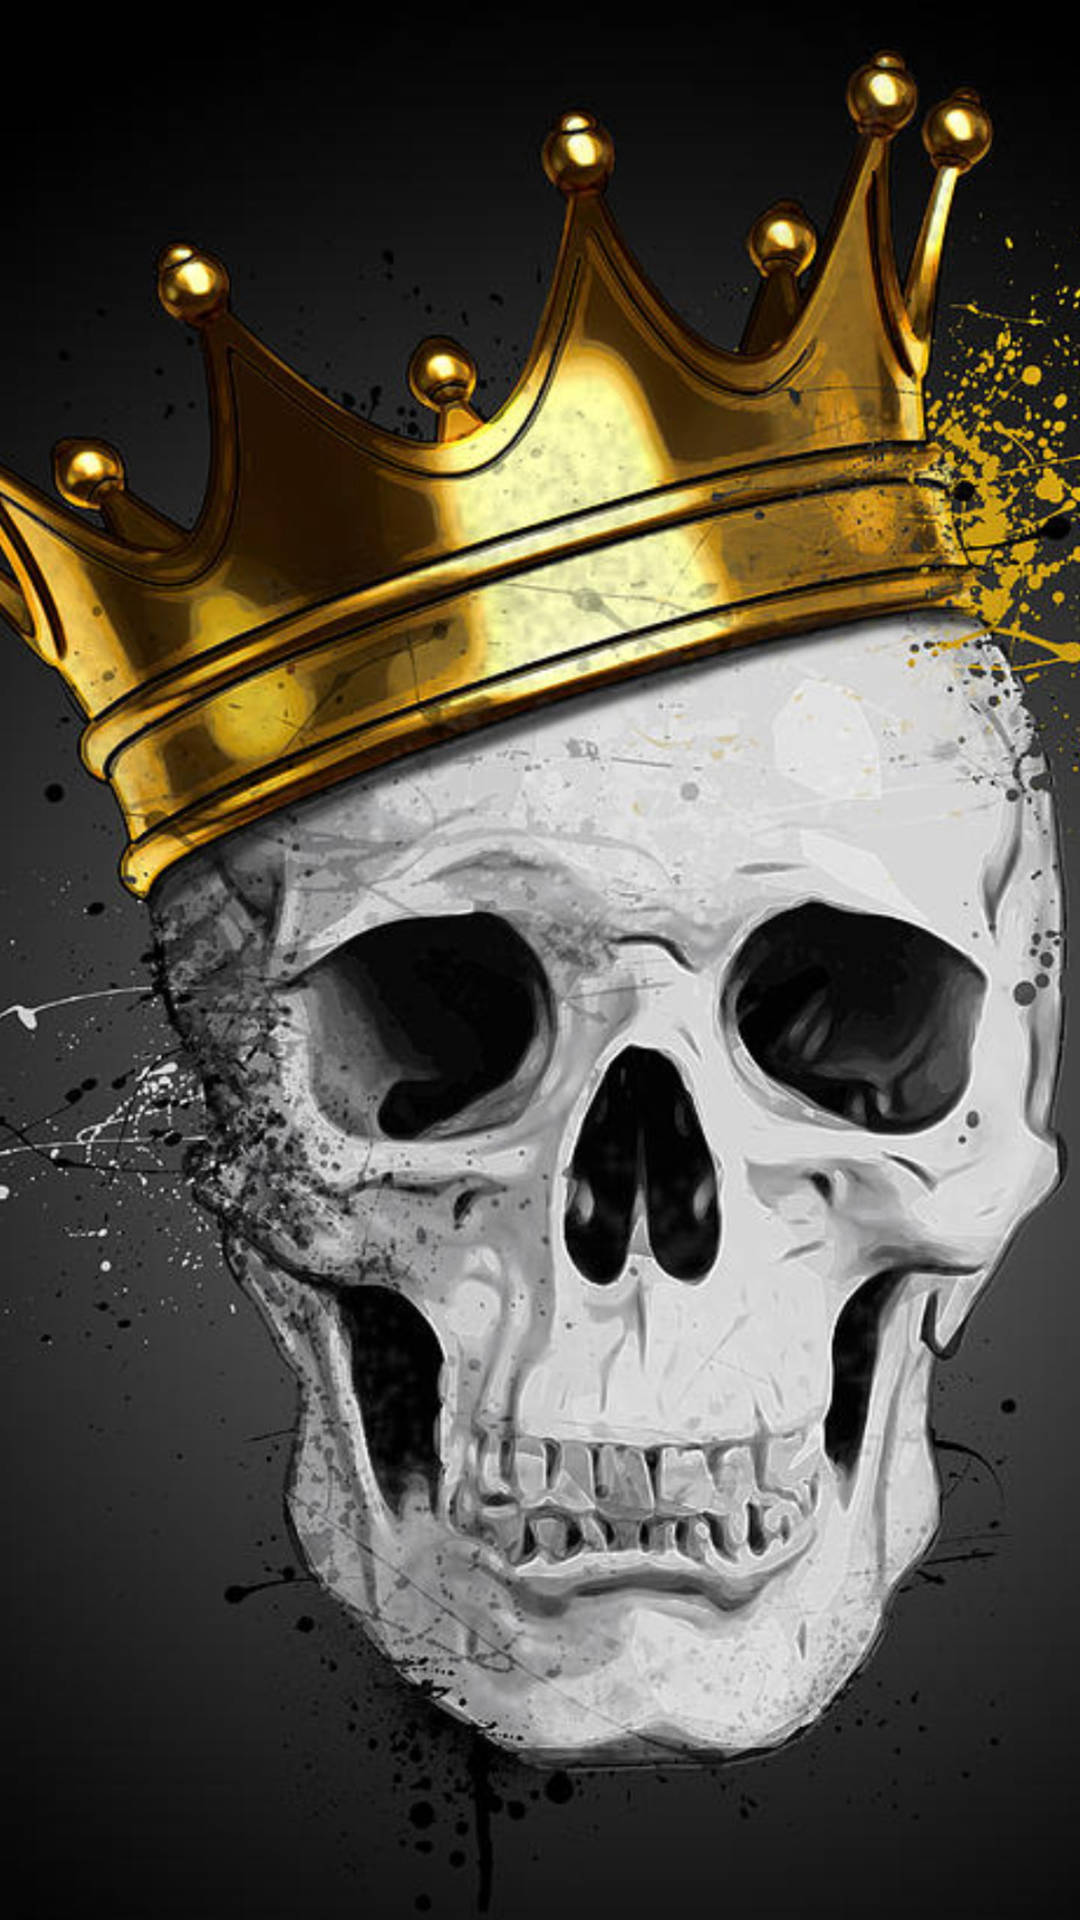 Gangster Skull With Gold Crown